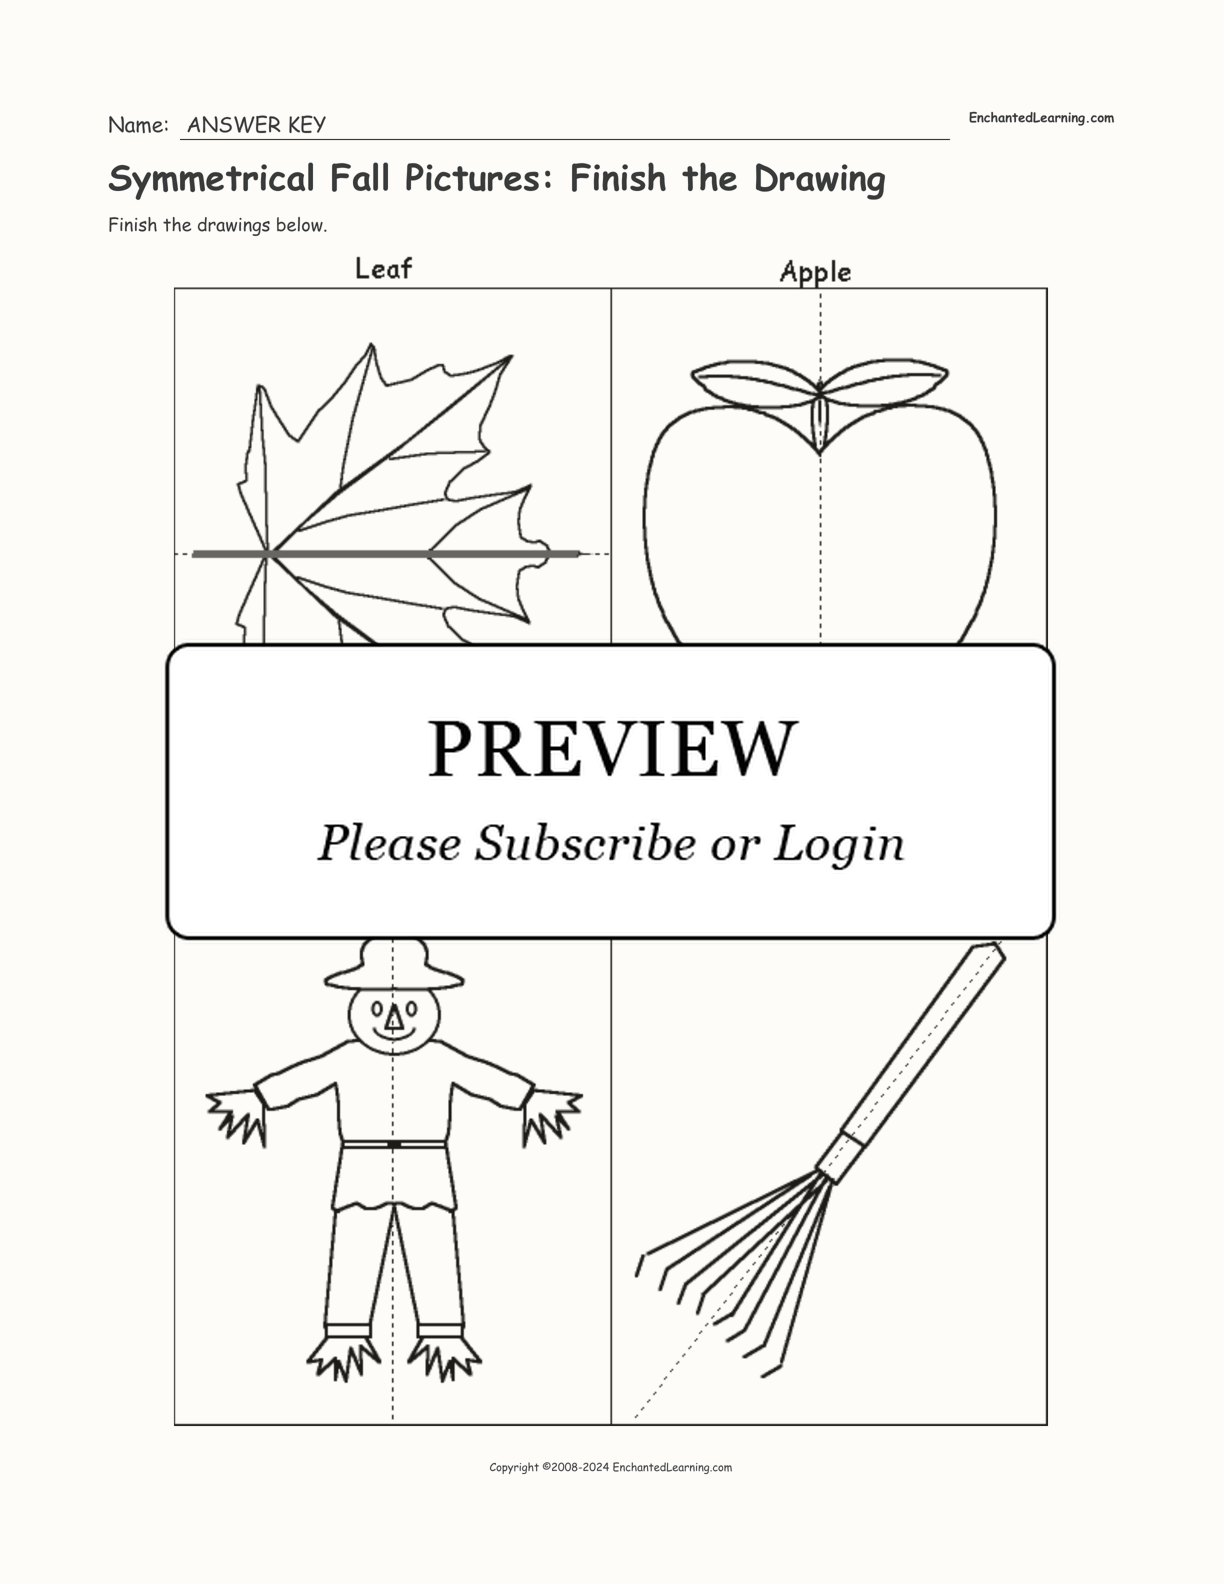 Symmetrical Fall Pictures: Finish the Drawing interactive worksheet page 2